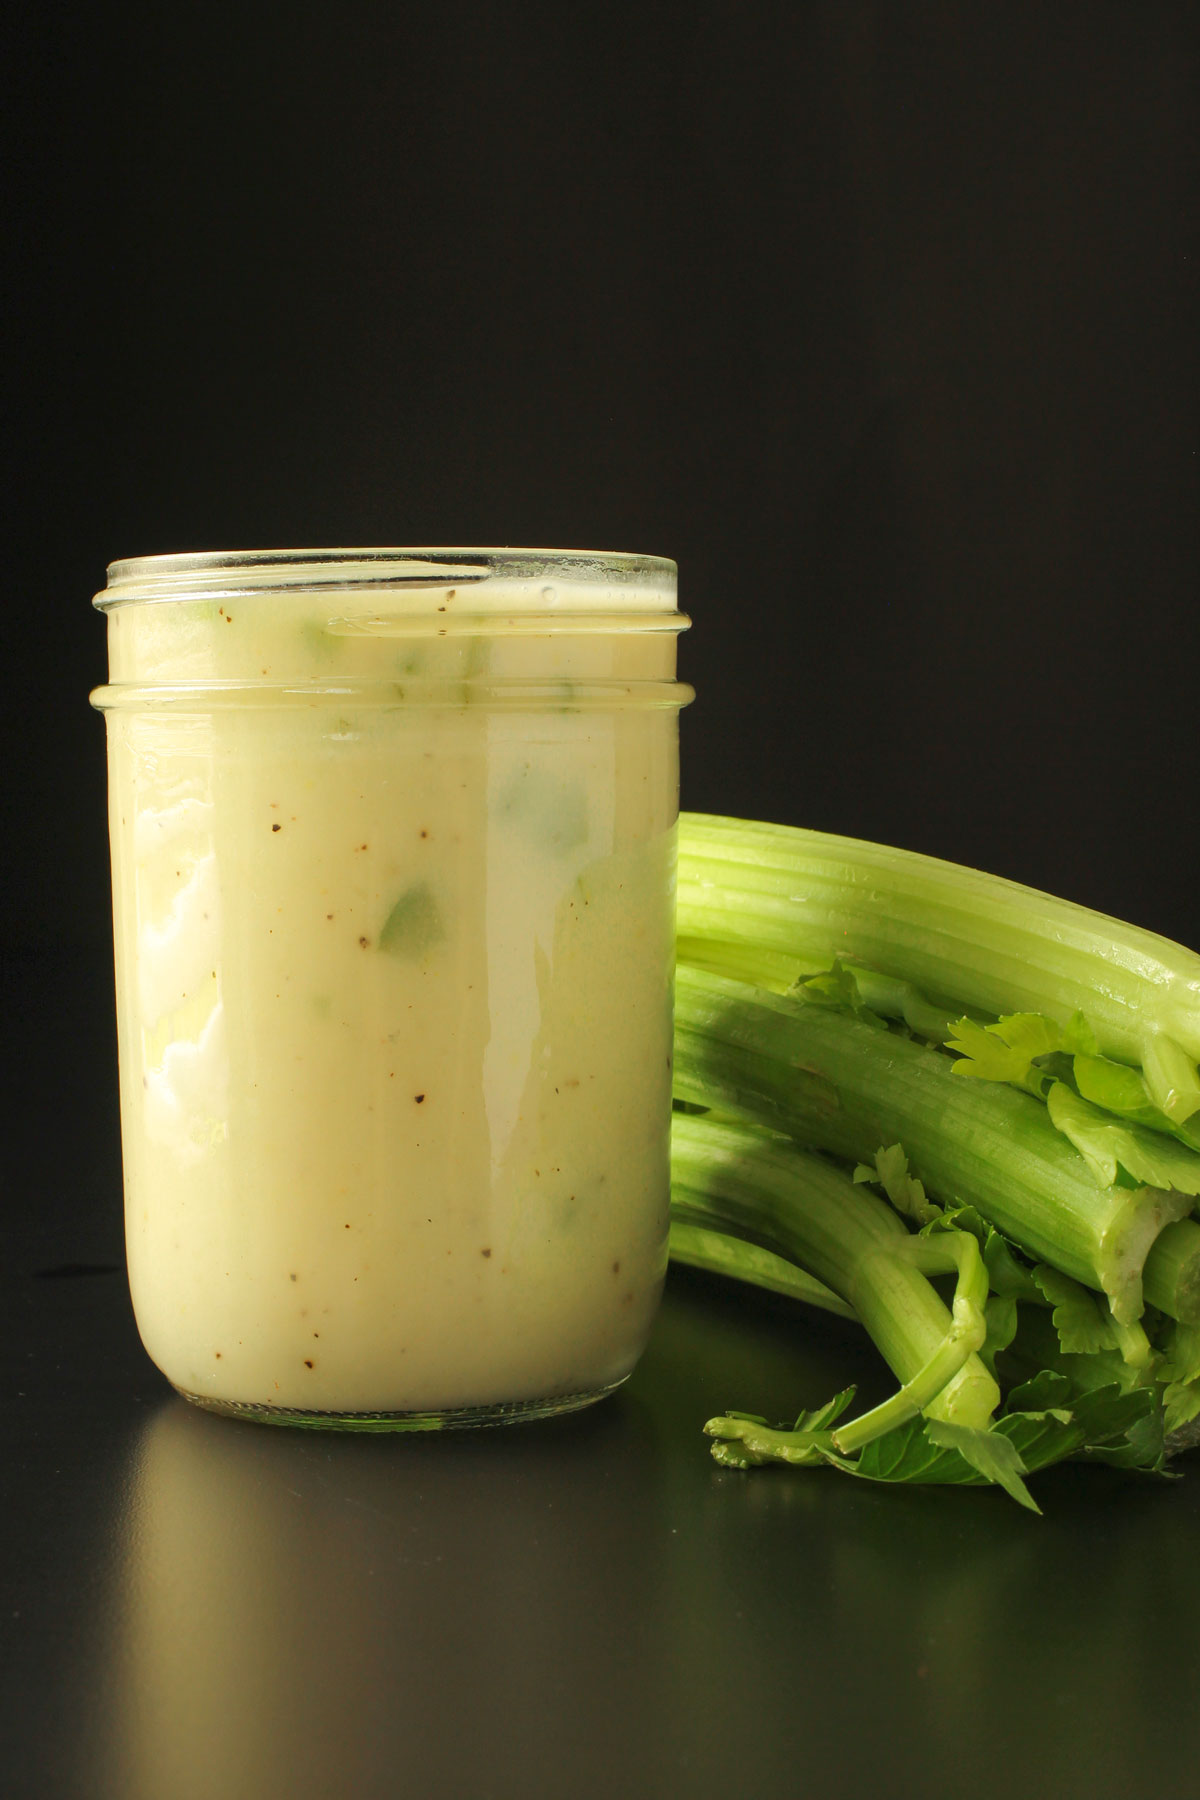 wide-mouth mason jar full of cream of celery soup next to stalk of celery on black table top.